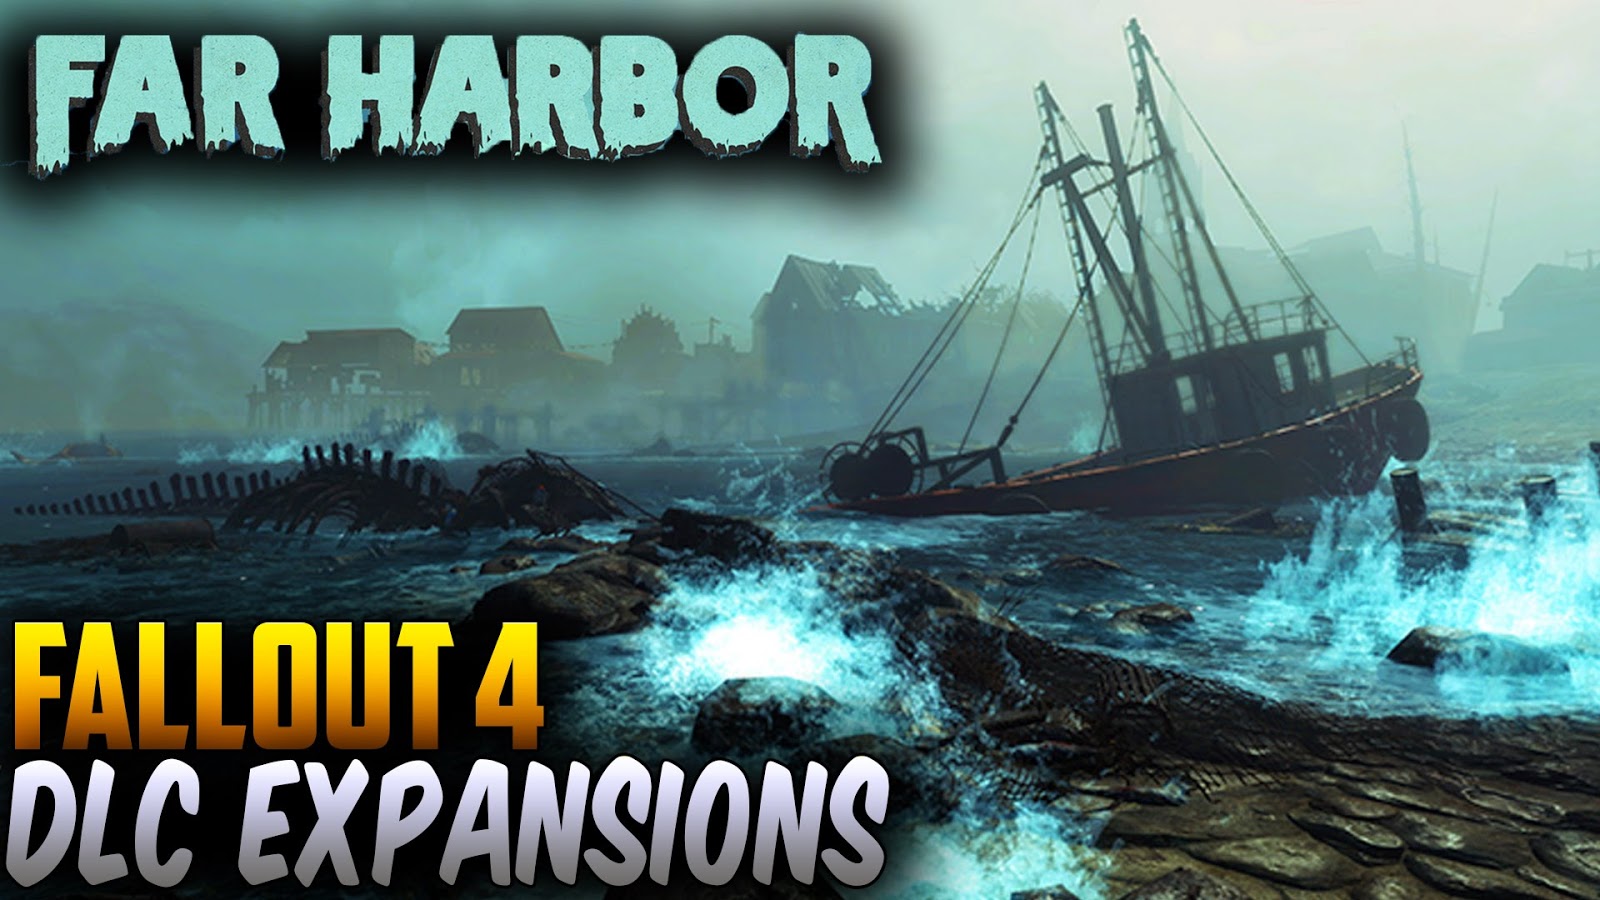 Fallout 4 for harbor wiki фото 60